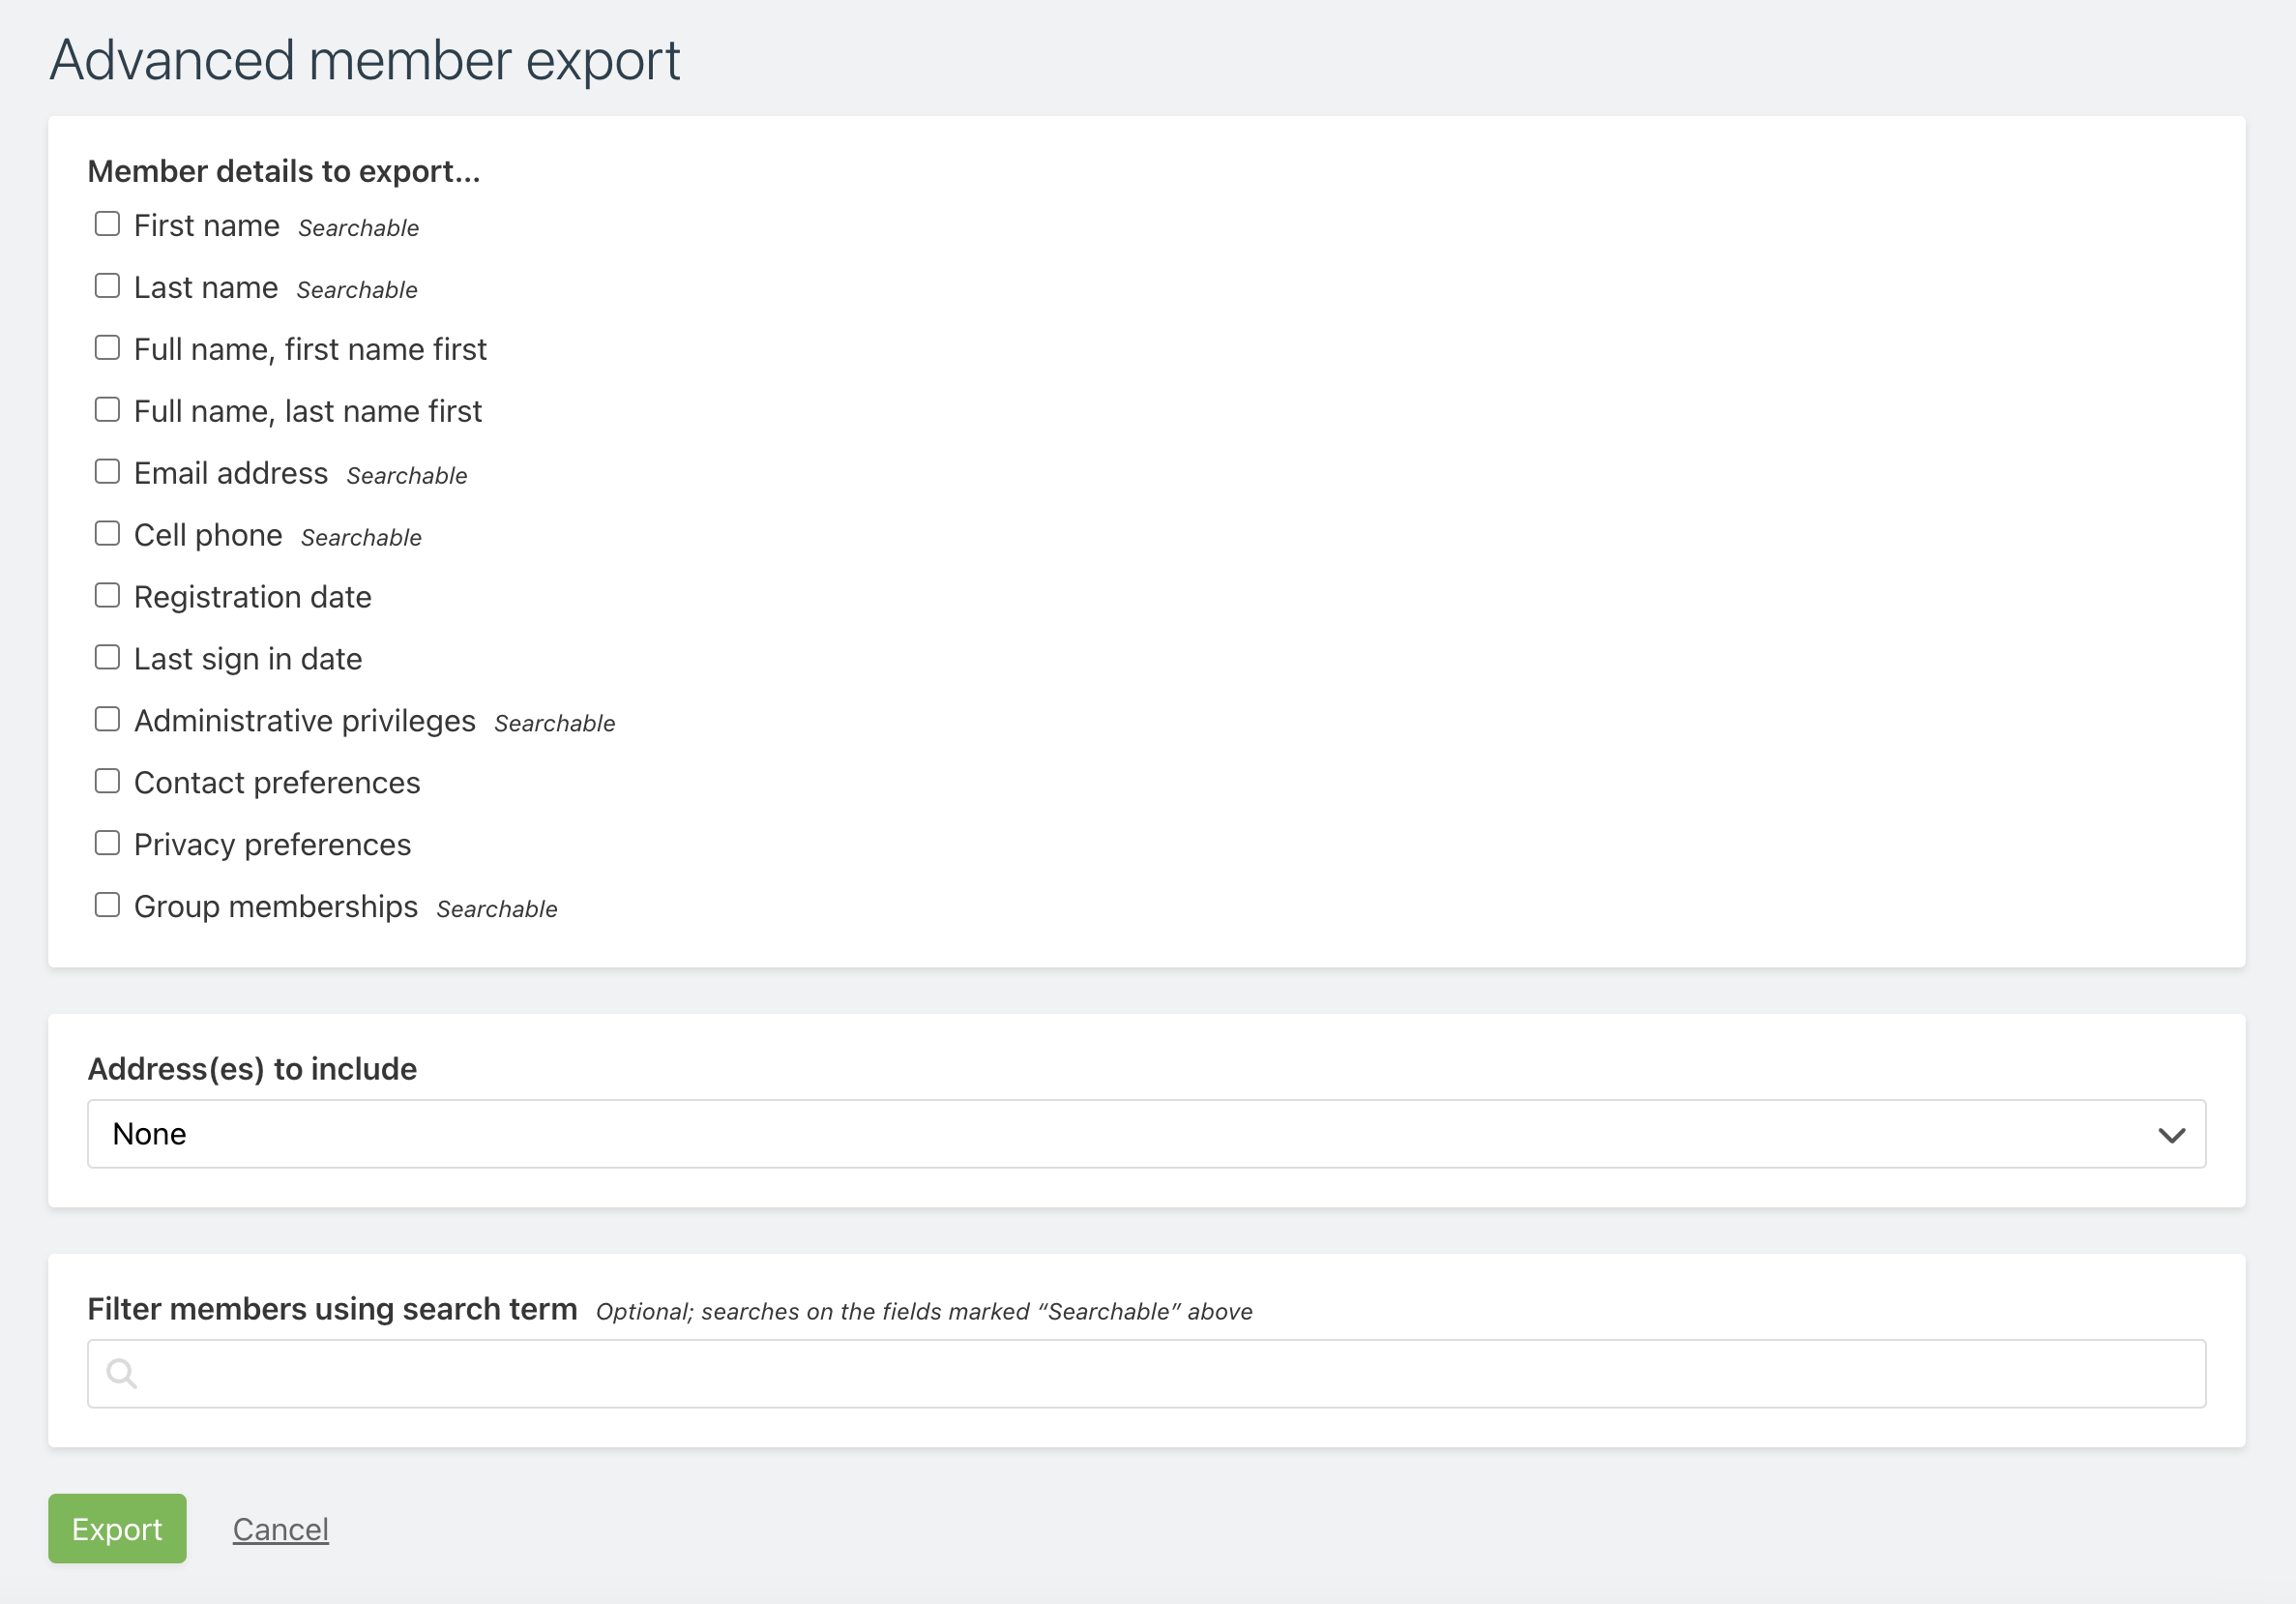 Screenshot of the advanced member export page